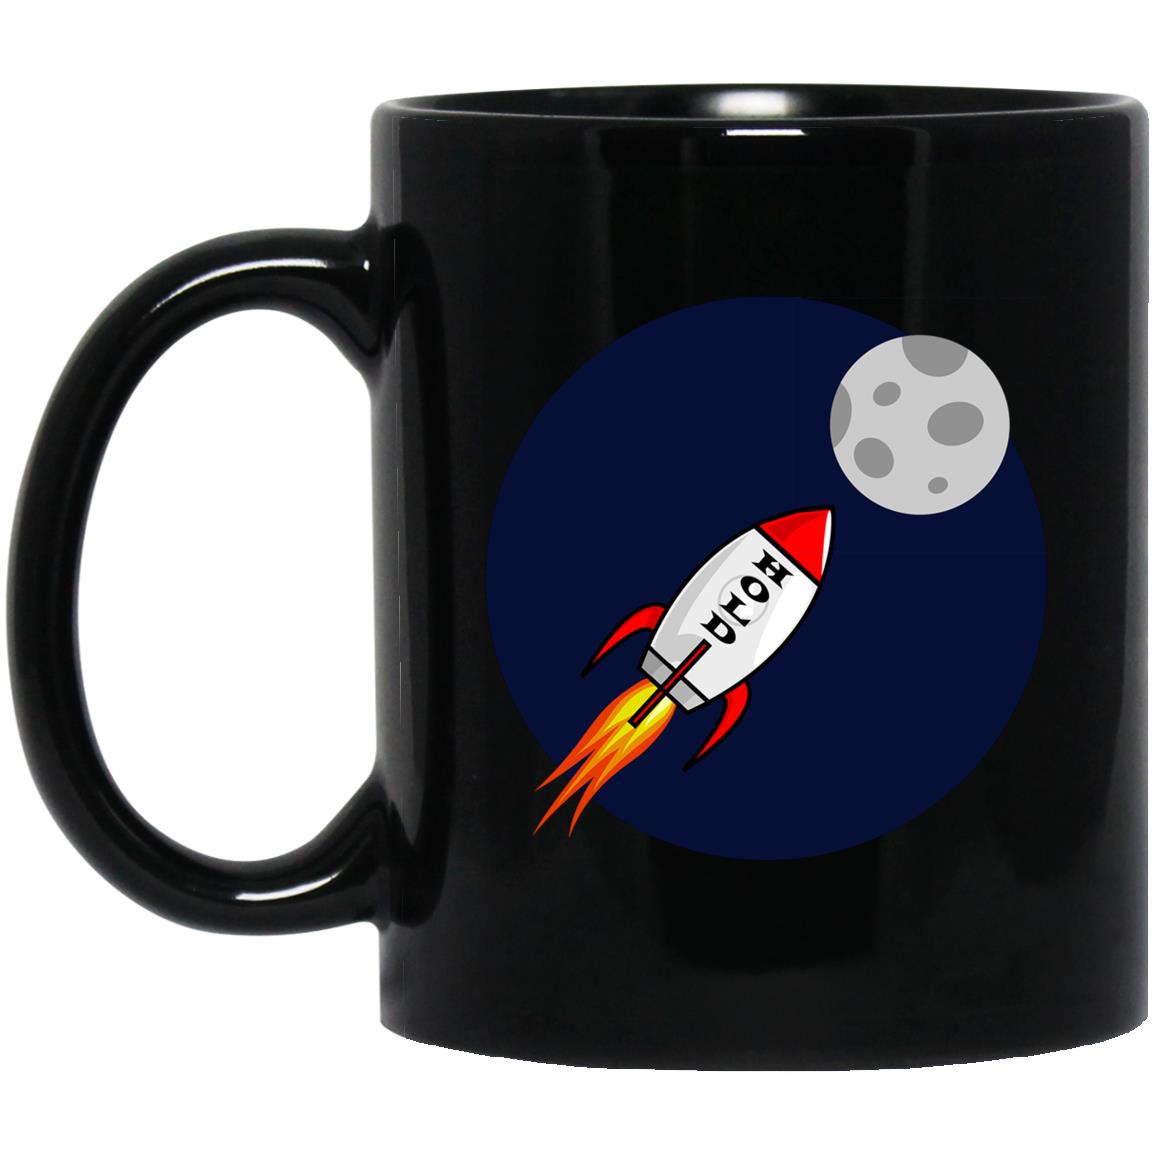 HOLD Moon Rocket Red – Cups Mugs Black, White & Color-Changing